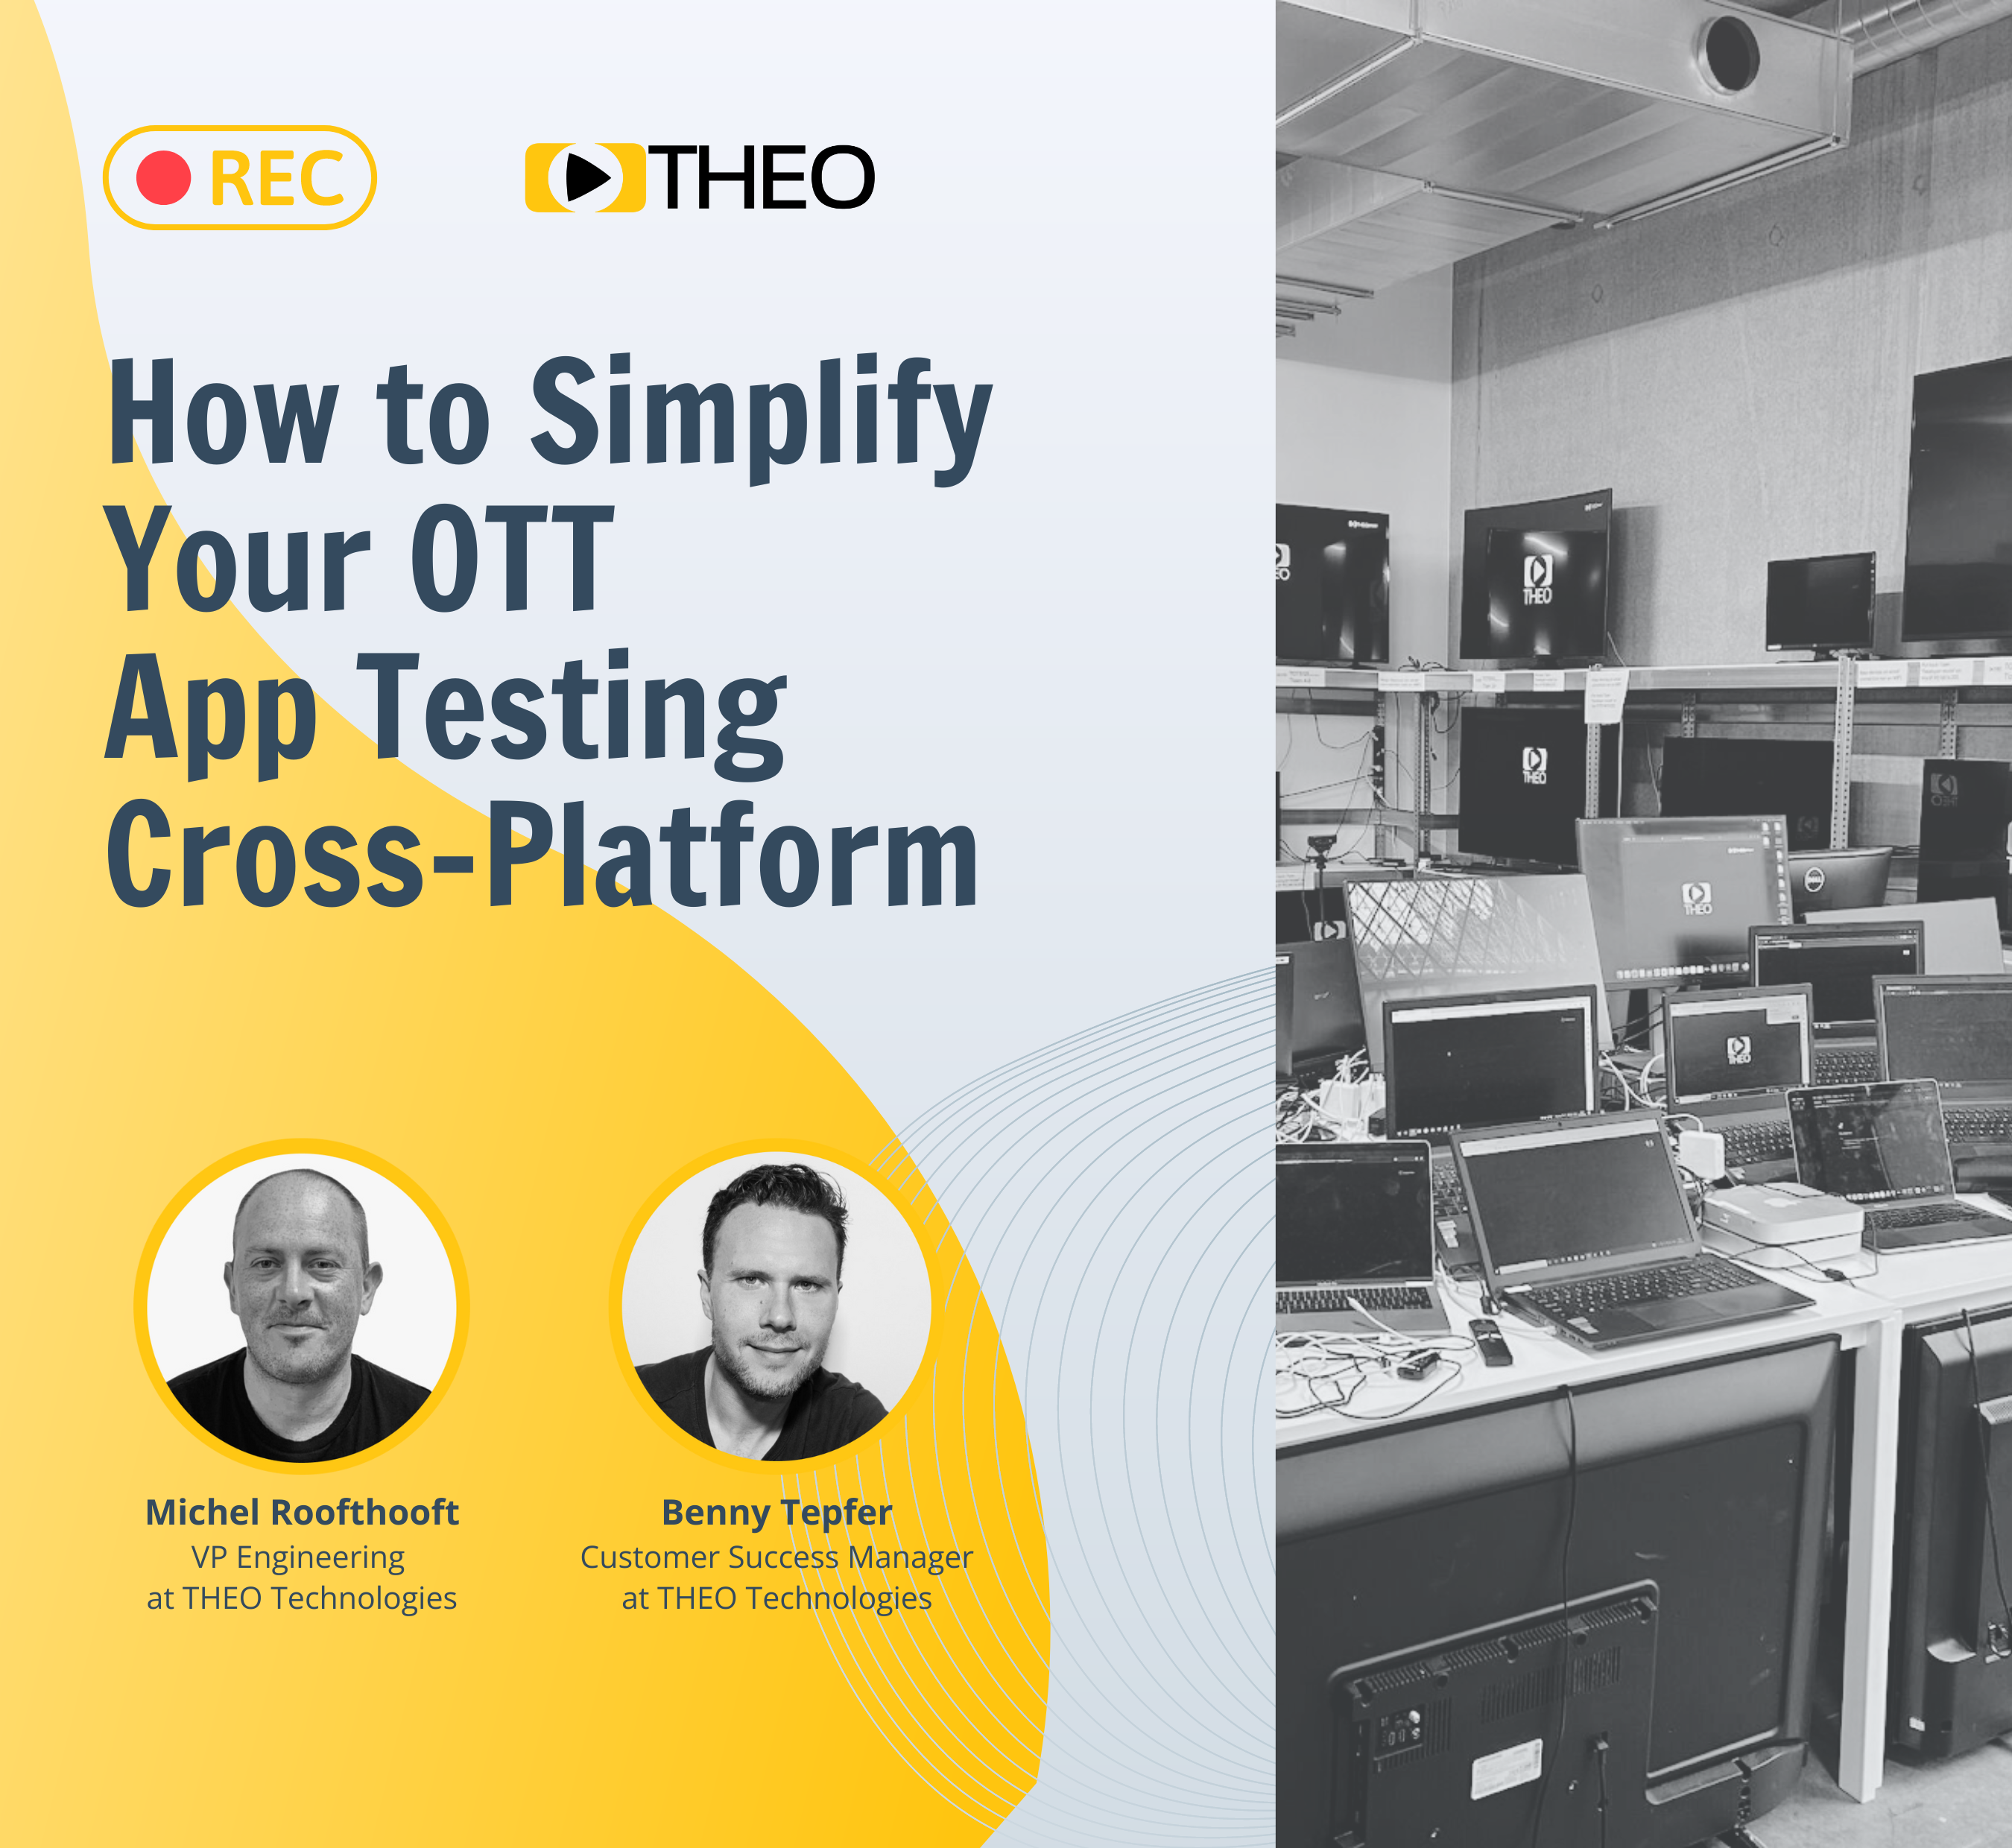 Automated testing webinar poster (1653 x 1800 px) (1800 x 1653 px)